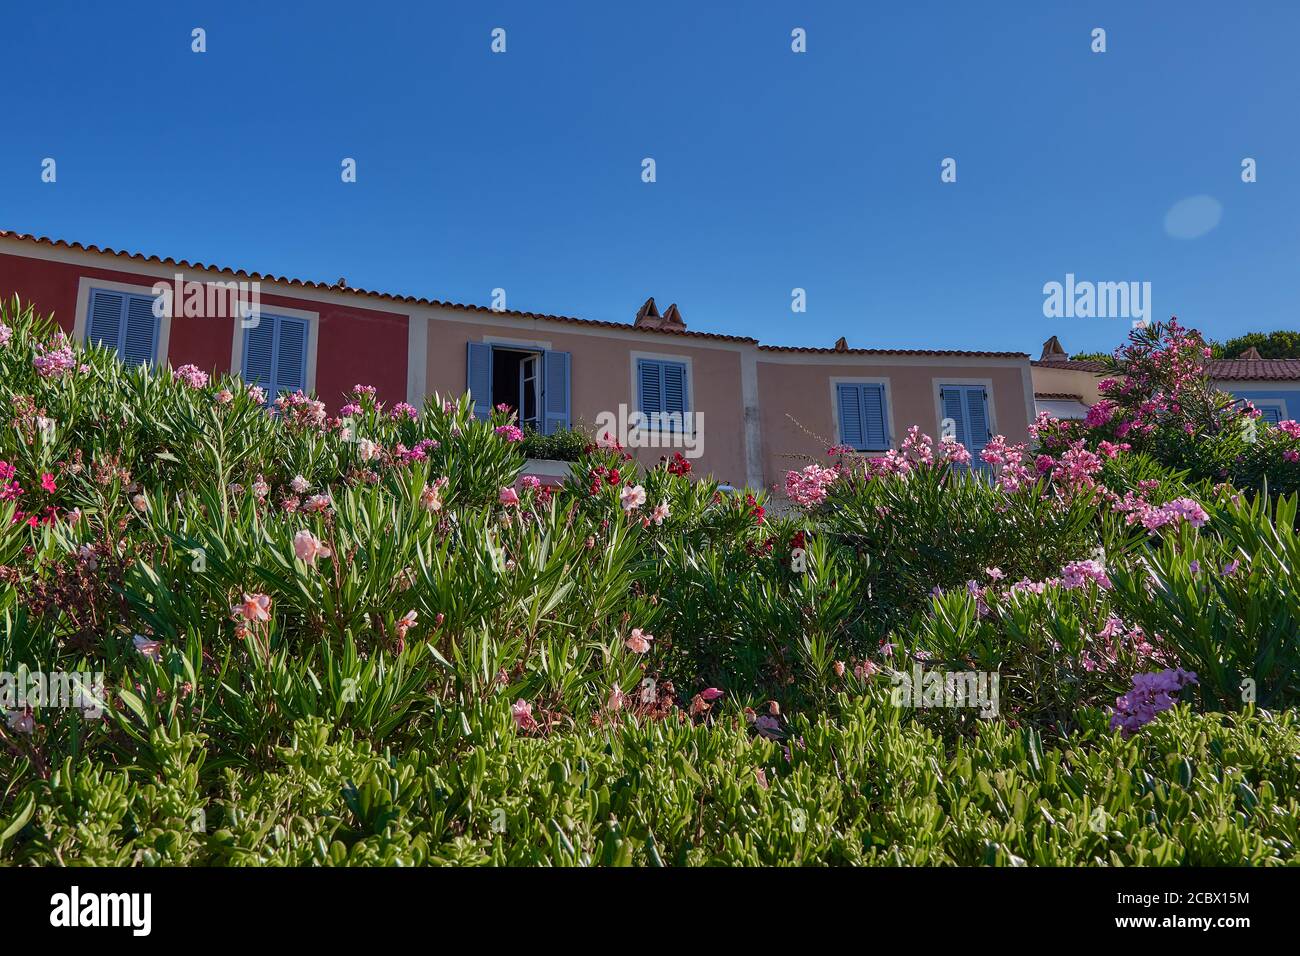 Colourfull houses surrounded by oleander flowers on Sardinia island Stock Photo